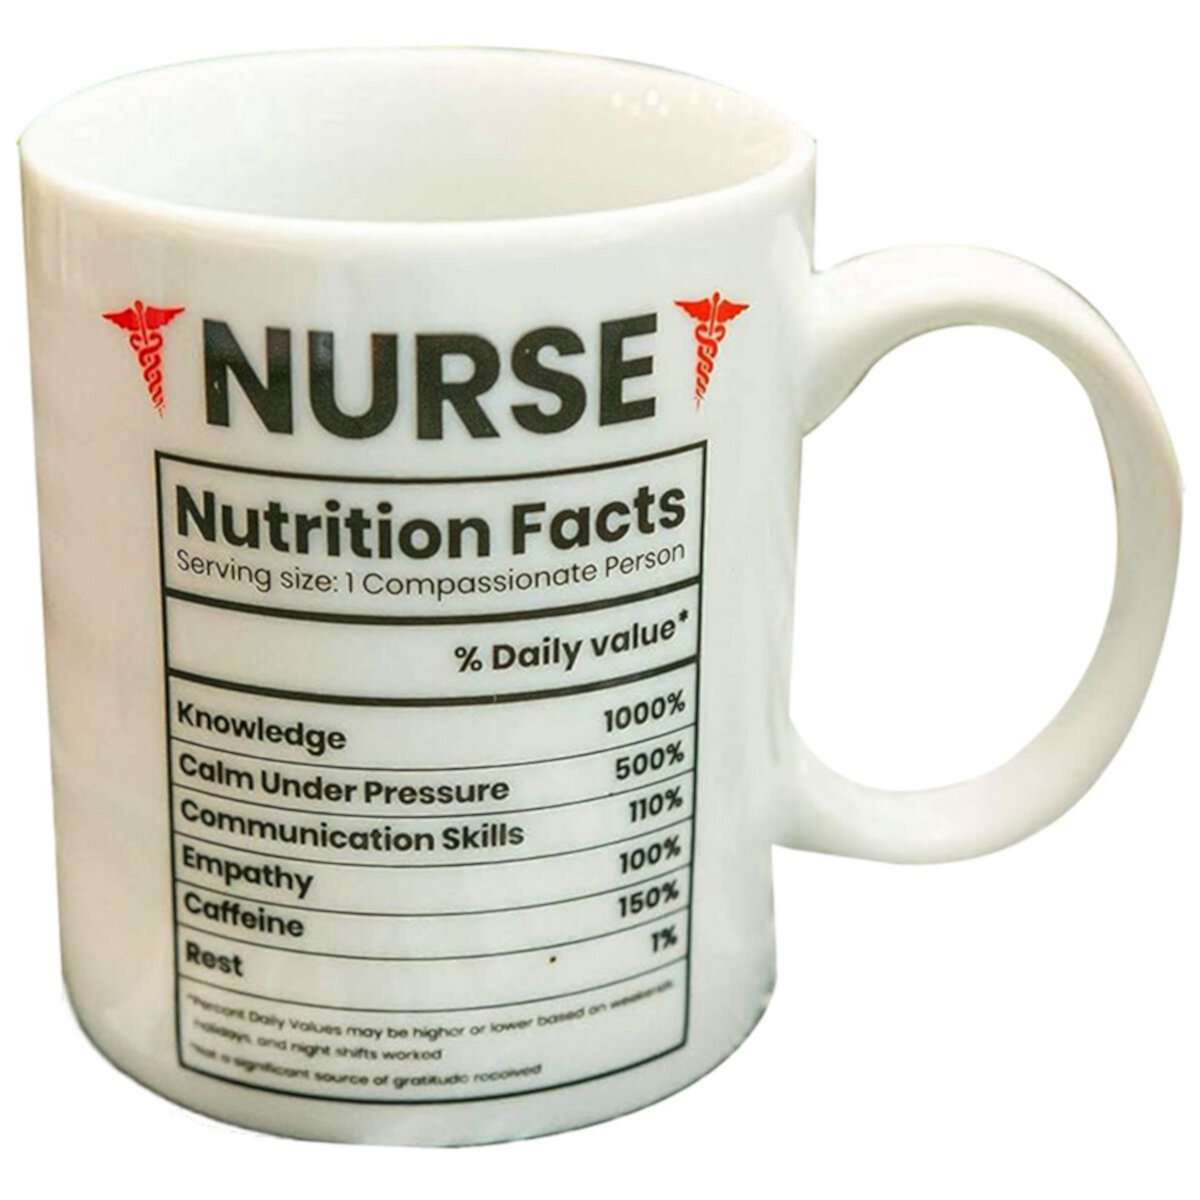 Nurse Gifts For Women Or Men Gifts For Nurses - Novelty Funny Light Autumn